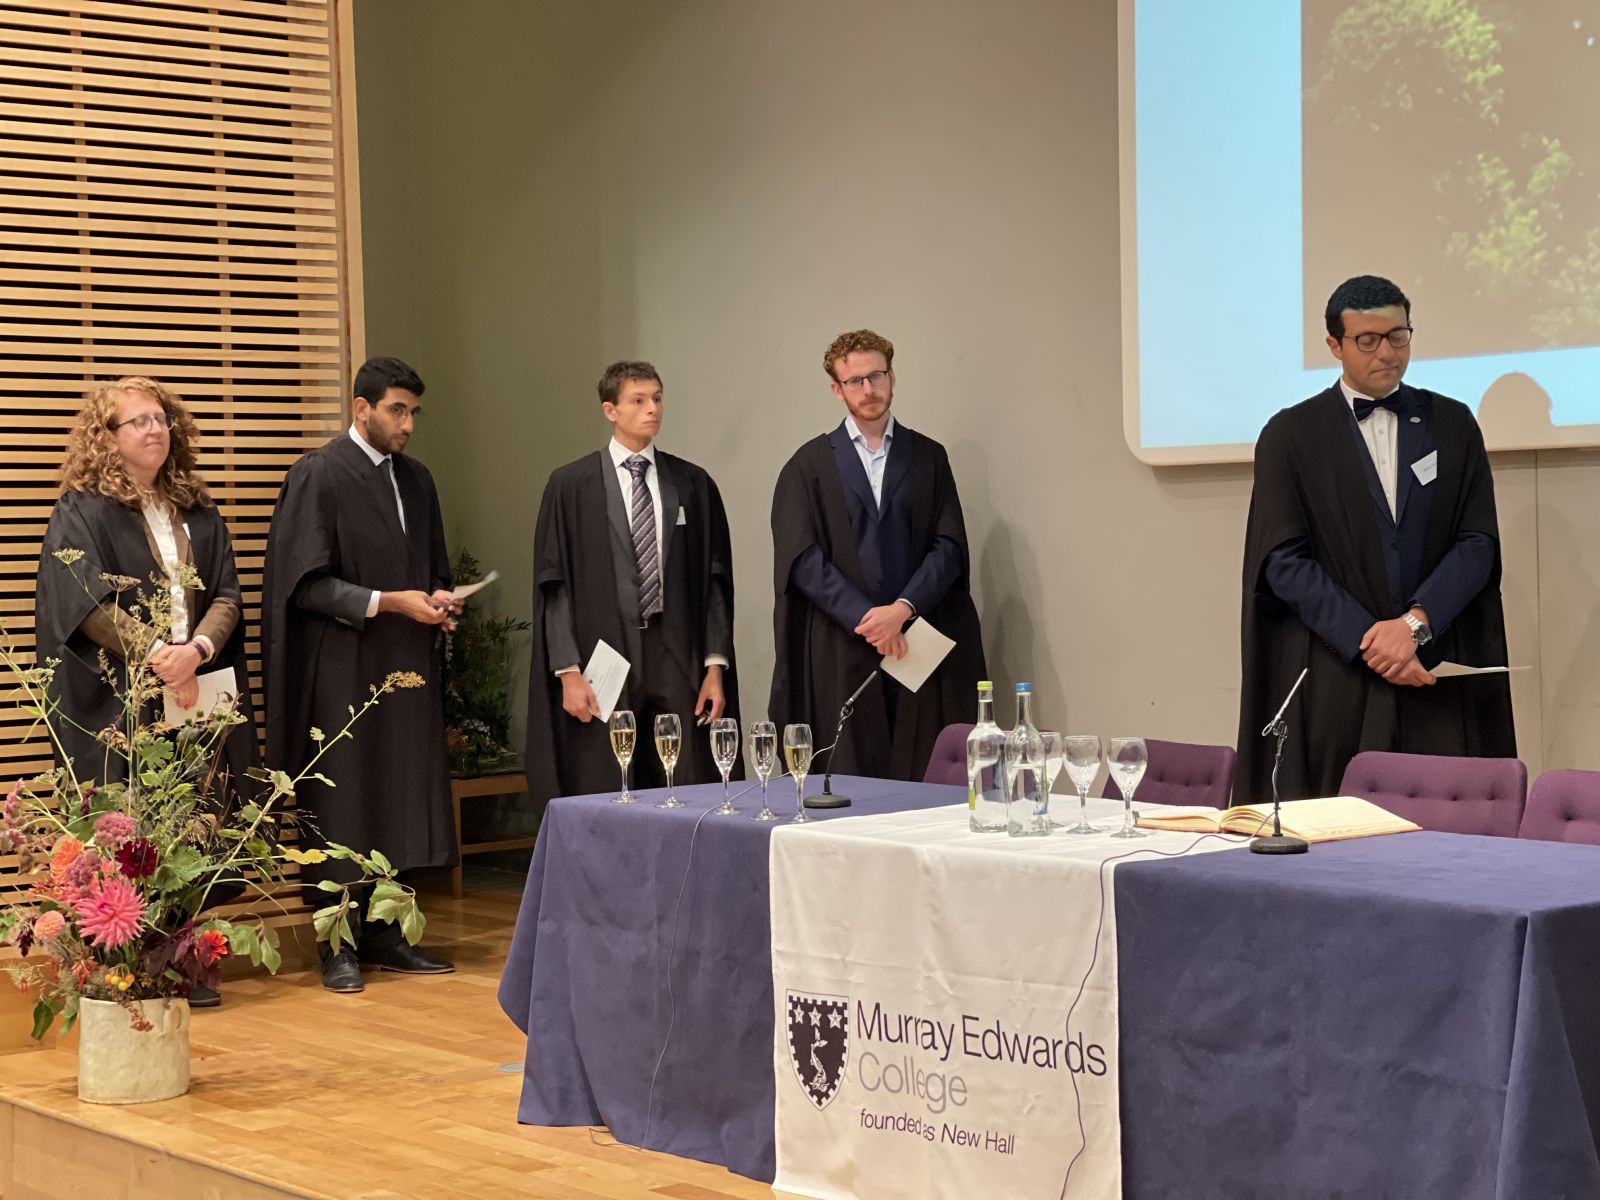 Five Fellows in a line on a stage. Left to right: Dr Joeva Rock, Dr Mohamed Moussa, Dr David Willer, Dr Tiarnan Doherty, and Dr Moataz Assem.